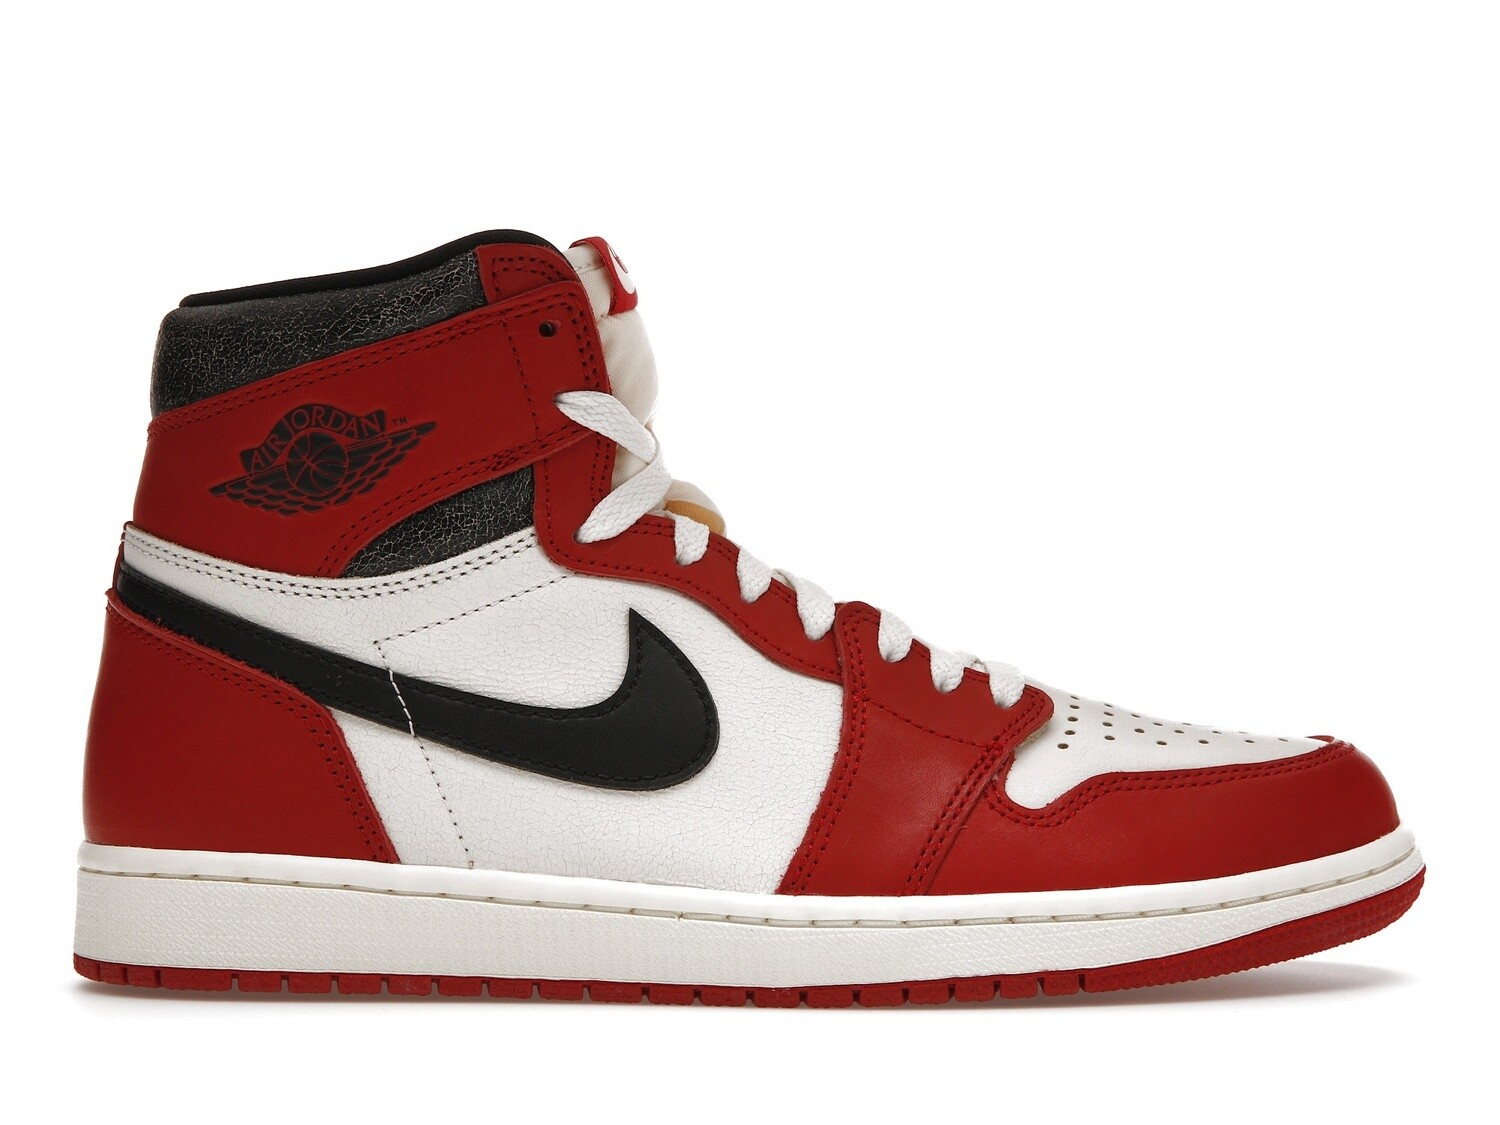 Jordan Retro 1 High Chicago Lost and Found (GS)